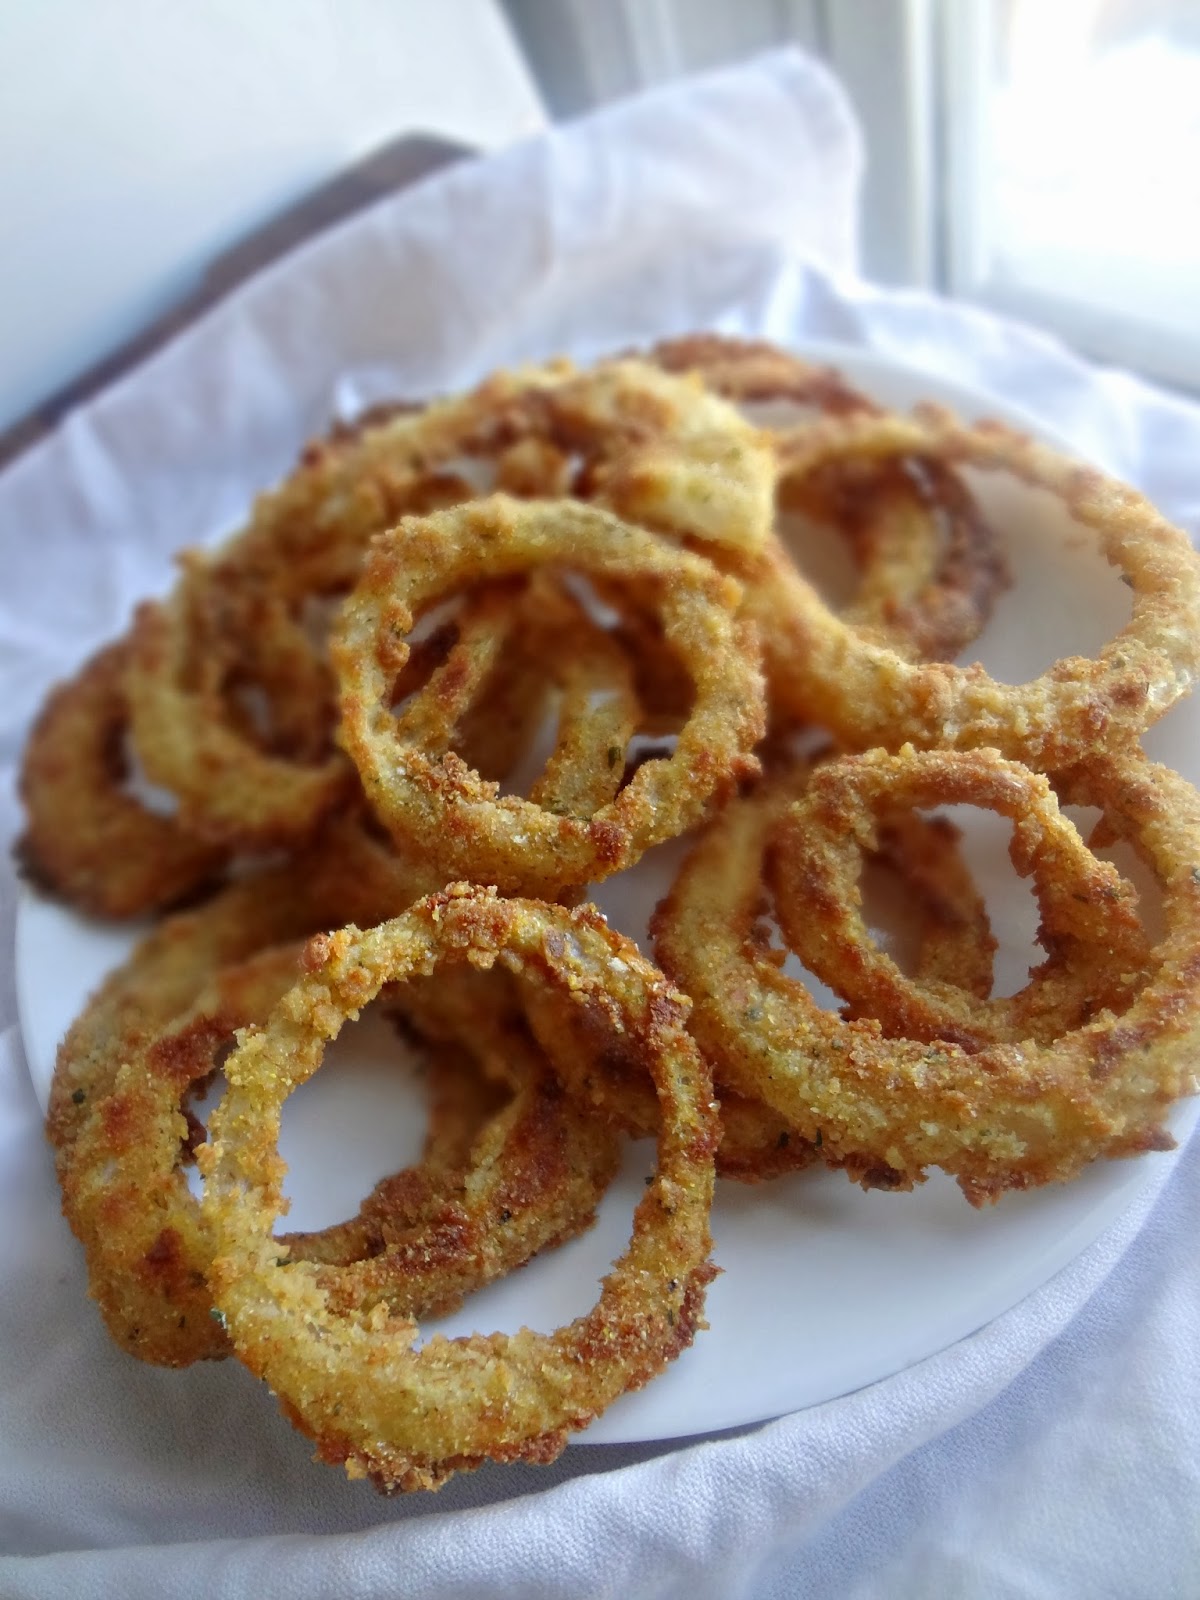 The Cooking Actress: Crispy Baked Onion Rings